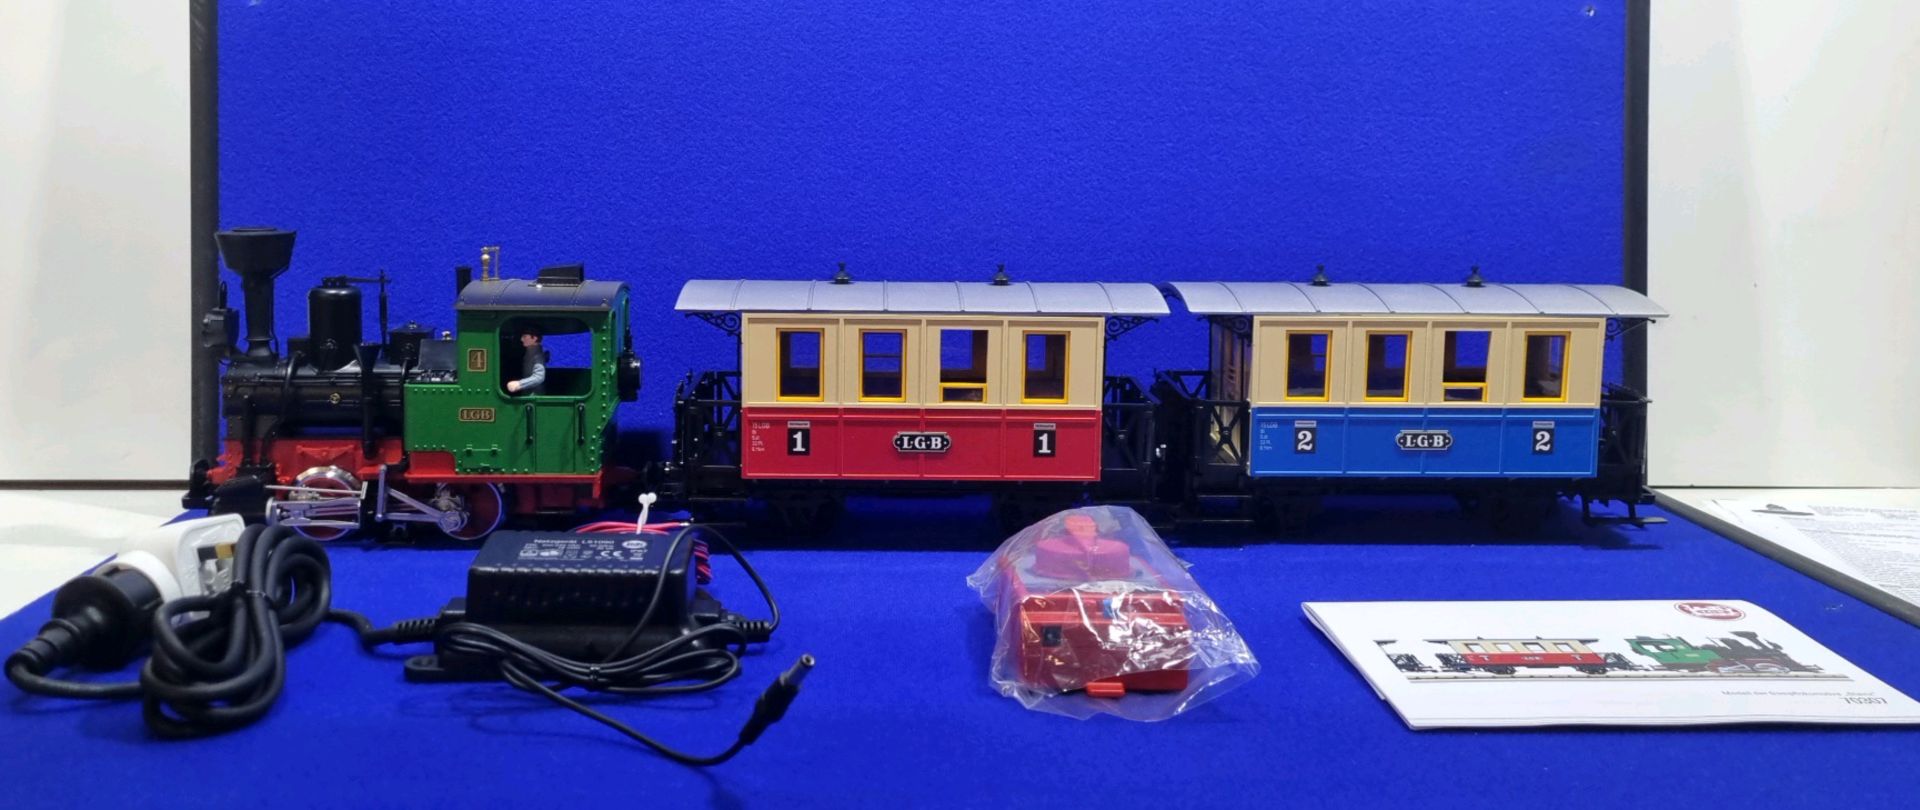 1 x LGB G Scale Trainset Starter Pack SKU70307 RRP £408.00 - Image 2 of 10